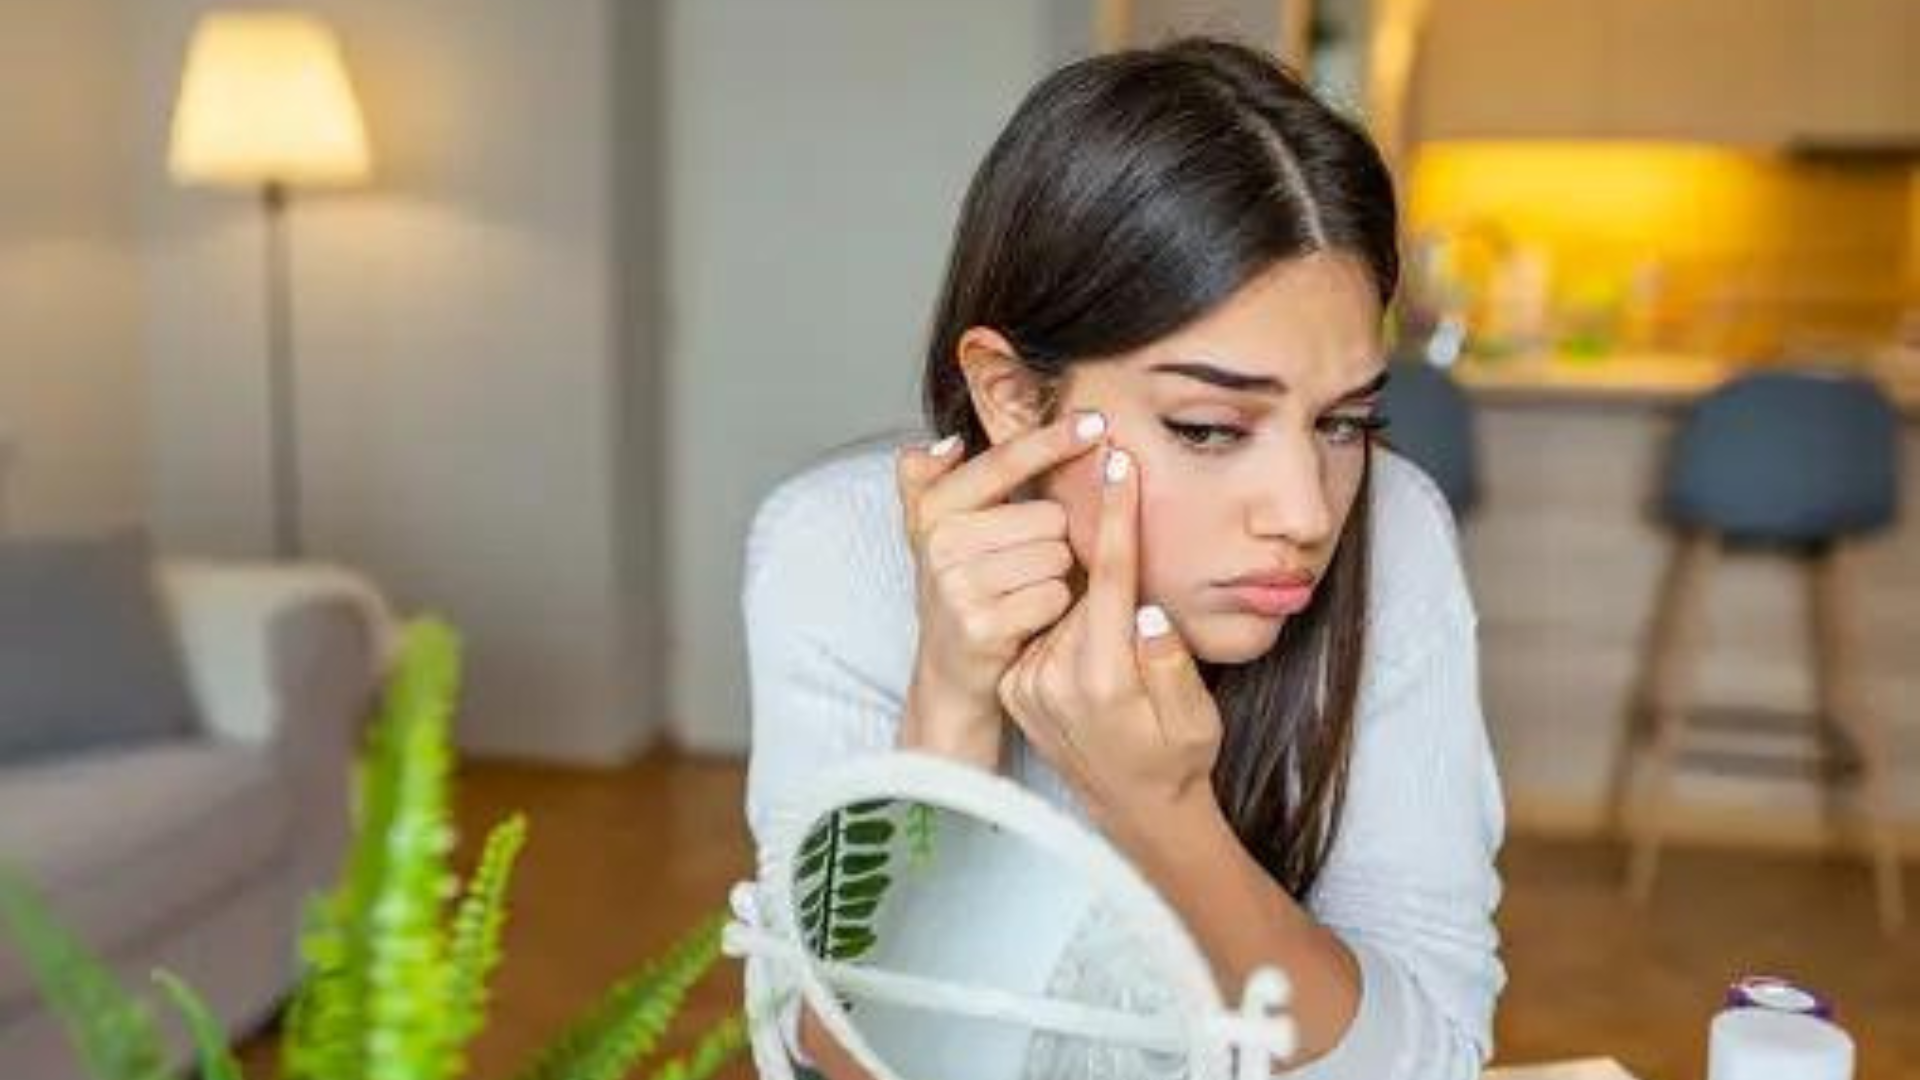 Battling Hormonal Acne? Here Are Some Effective Tips And Treatments